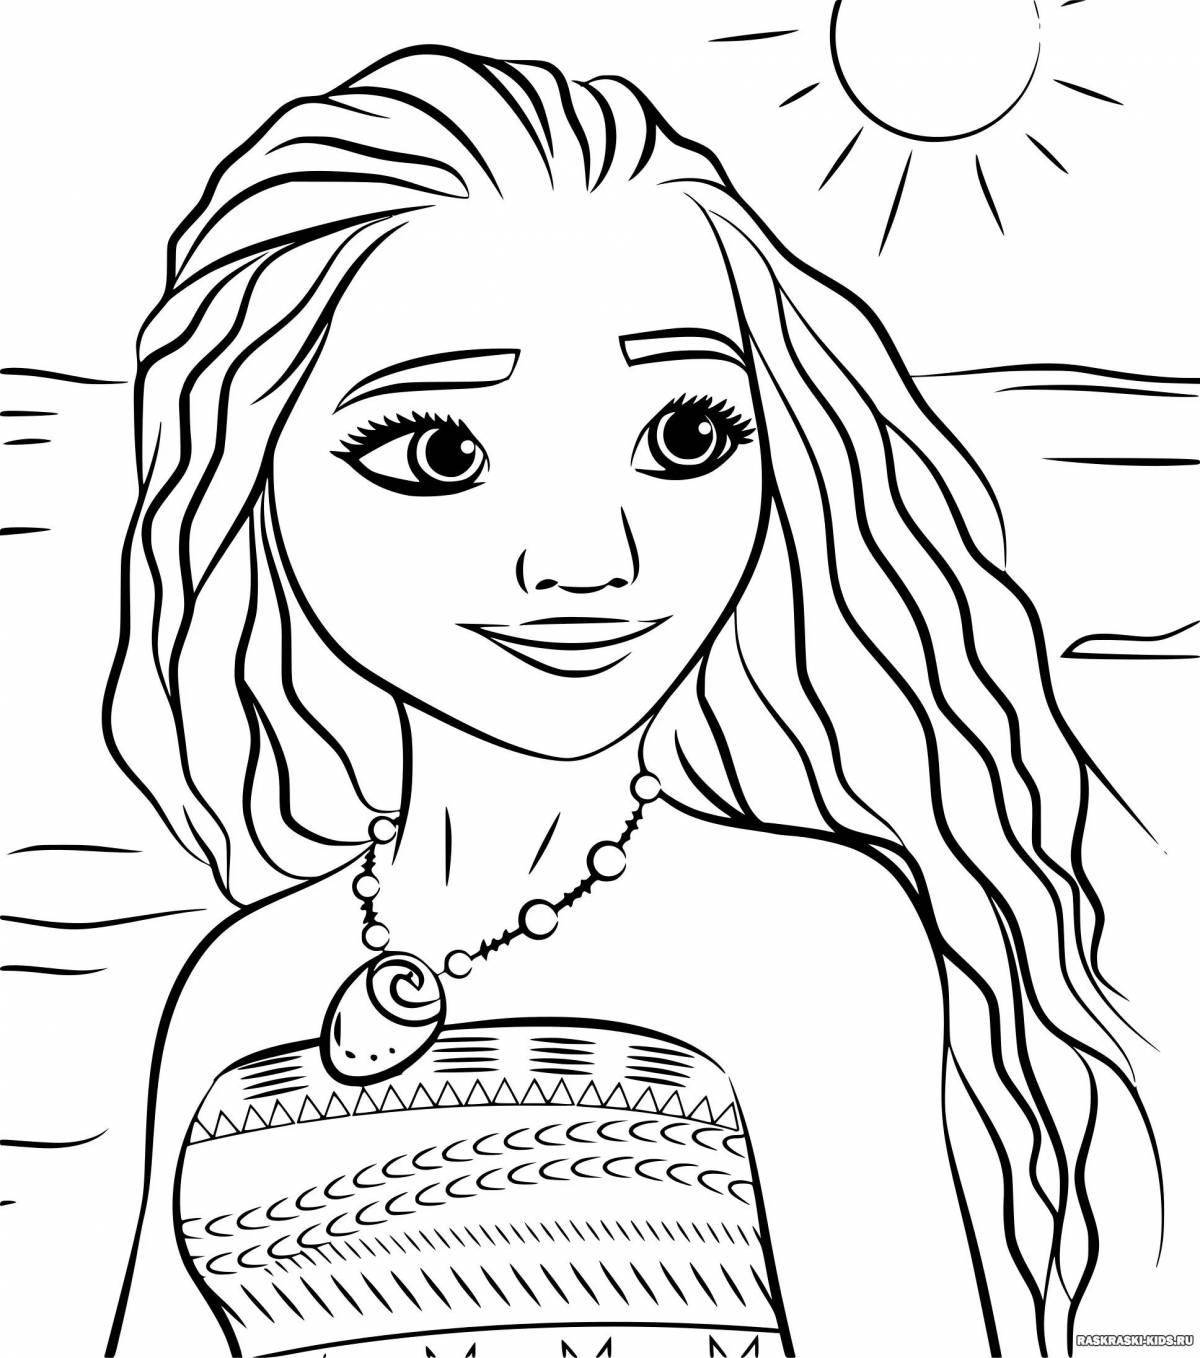 Exotic coloring book for girls cool for 7 years